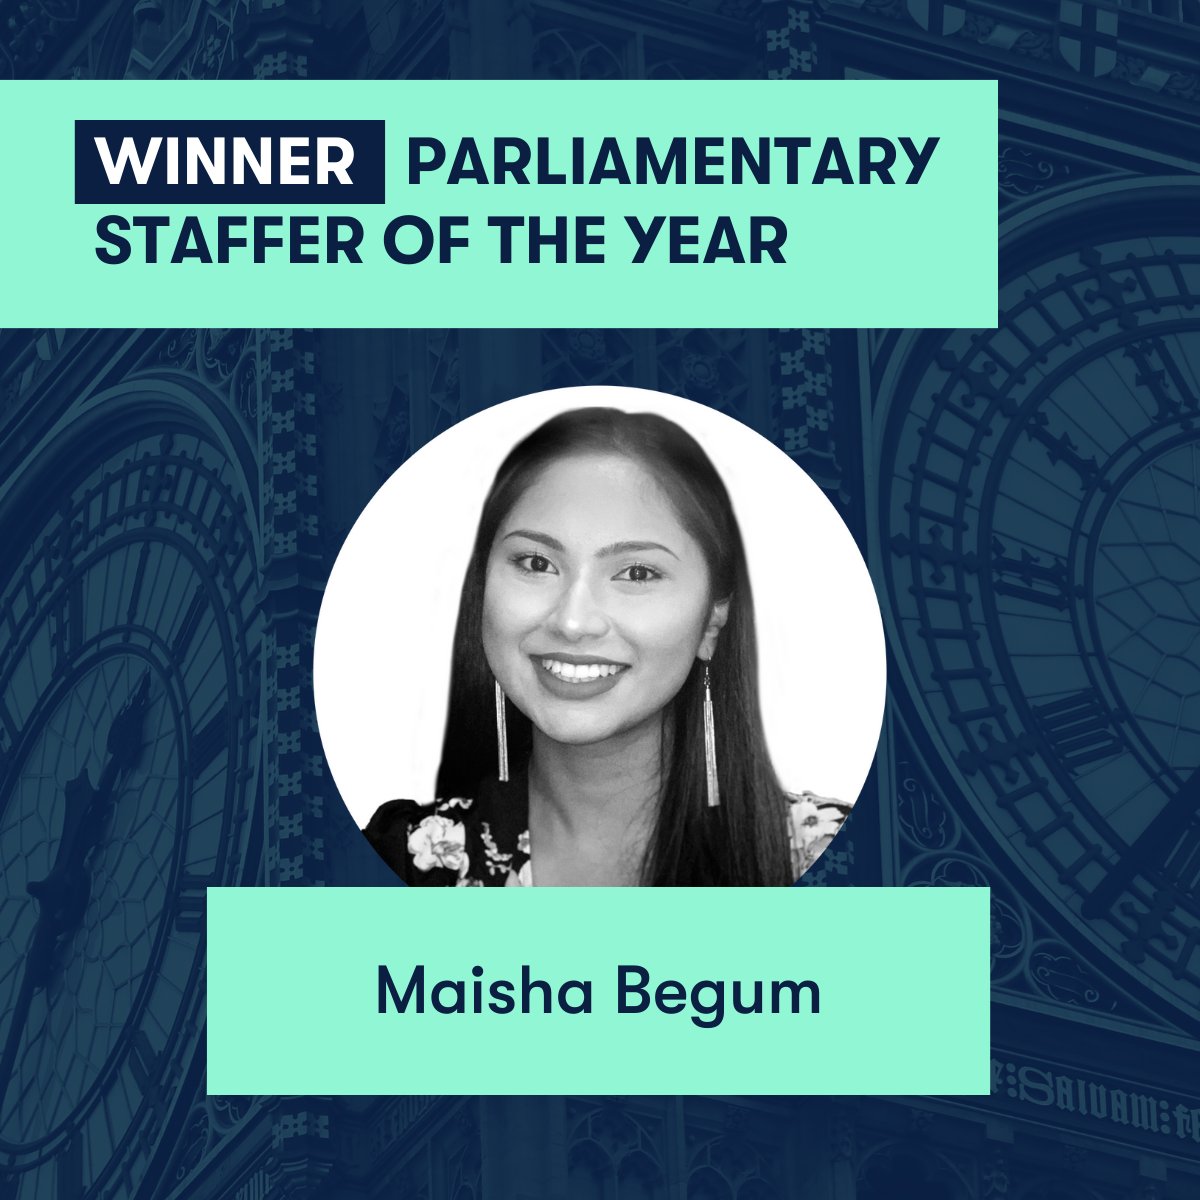 The winner of ‘Parliamentary Staffer of the Year’ is Maisha Begum! Awarded for her passionate efforts in tackling violence against women and girls. Massive congratulations, @Cllr_MaishaB! #PagefieldParliamentarianAwards